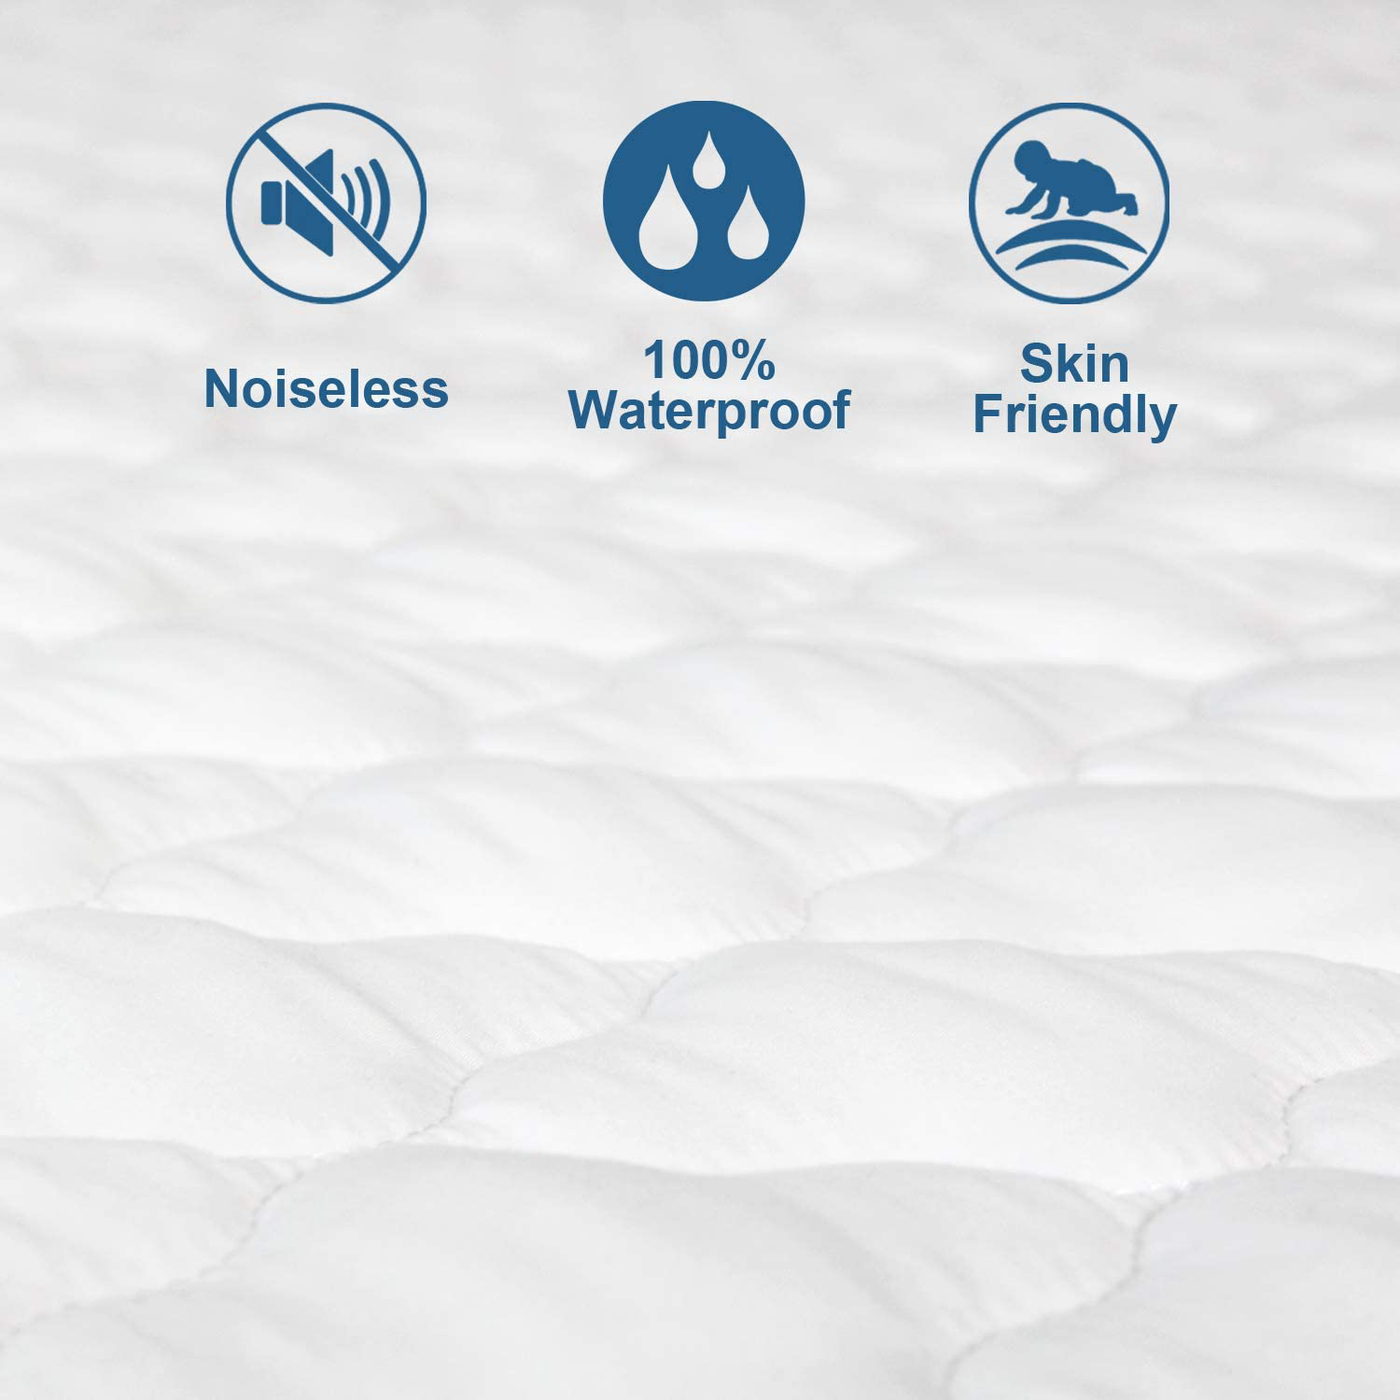 Waterproof King Mattress Protector, Deep Pocket King Mattress Pad Cover with Ultra Soft & Aborsbent Surface, Stain Protection Strethes up to 24" Depth